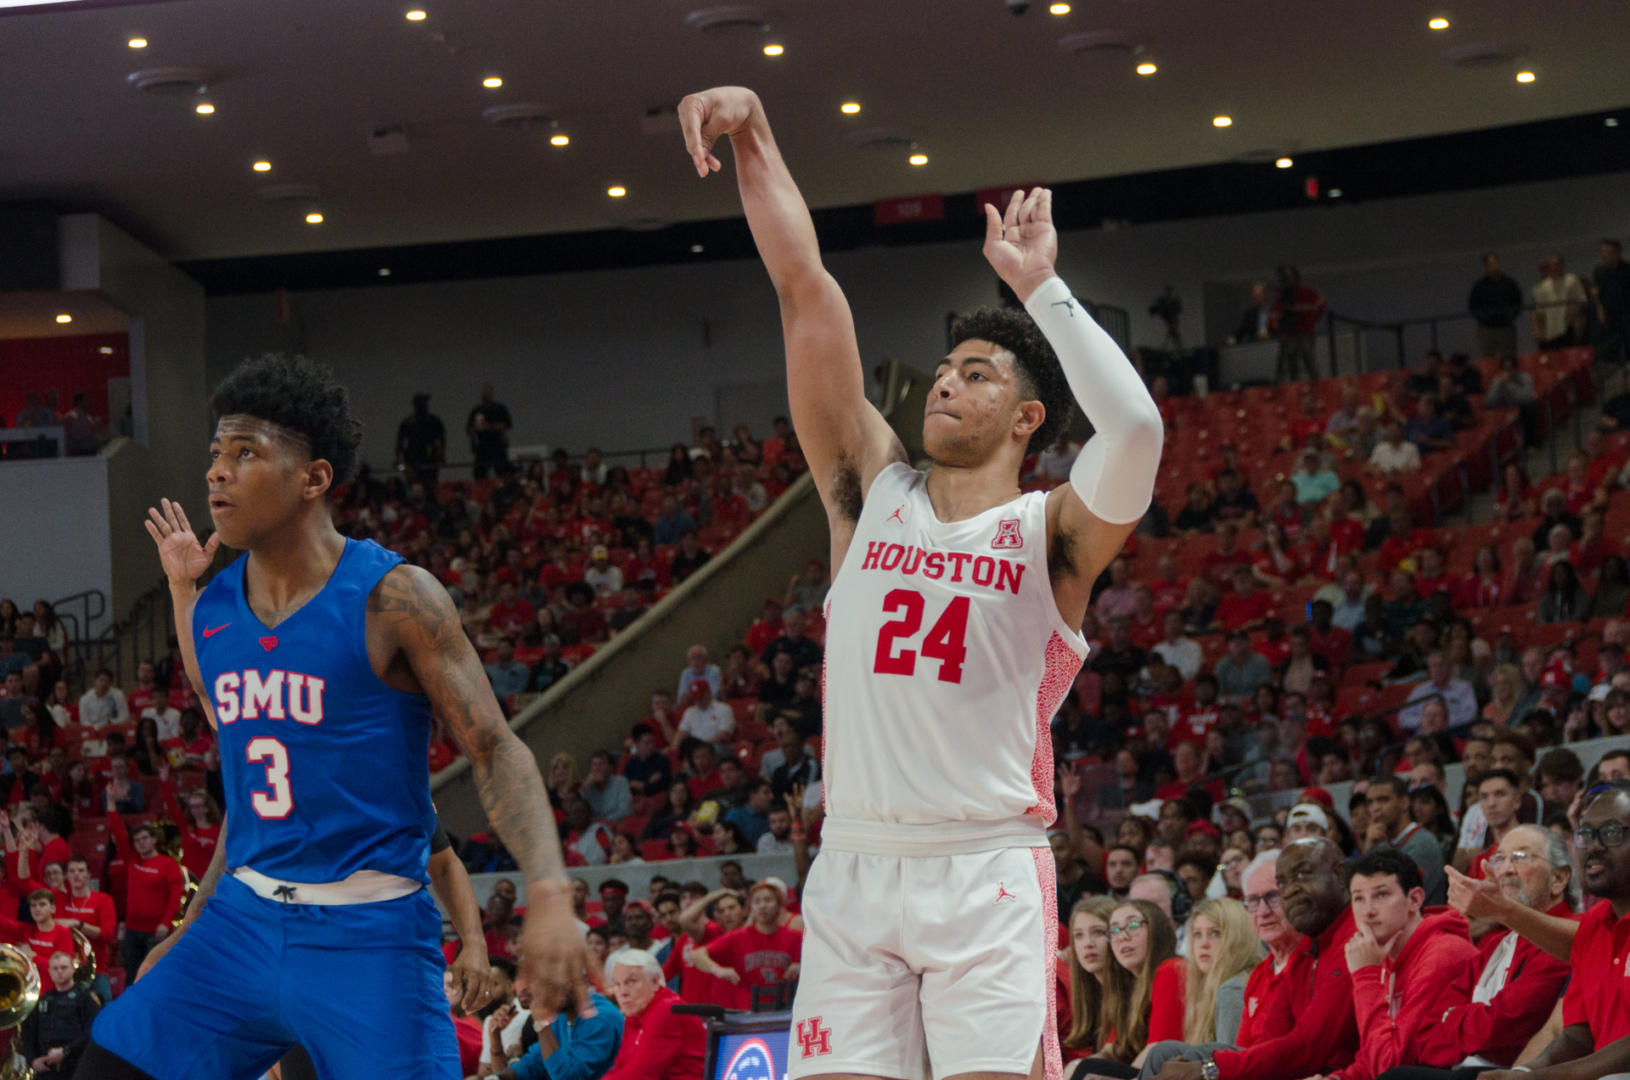 Sophomore guard Quentin Grimes, shown putting up a shot in Houston's win over SMU on Jan. 15 at Fertitta Center, was notably absent from the starting lineup after head coach Kelvin Sampson held open tryouts following the Tulsa loss. | Lino Sandil/The Cougar